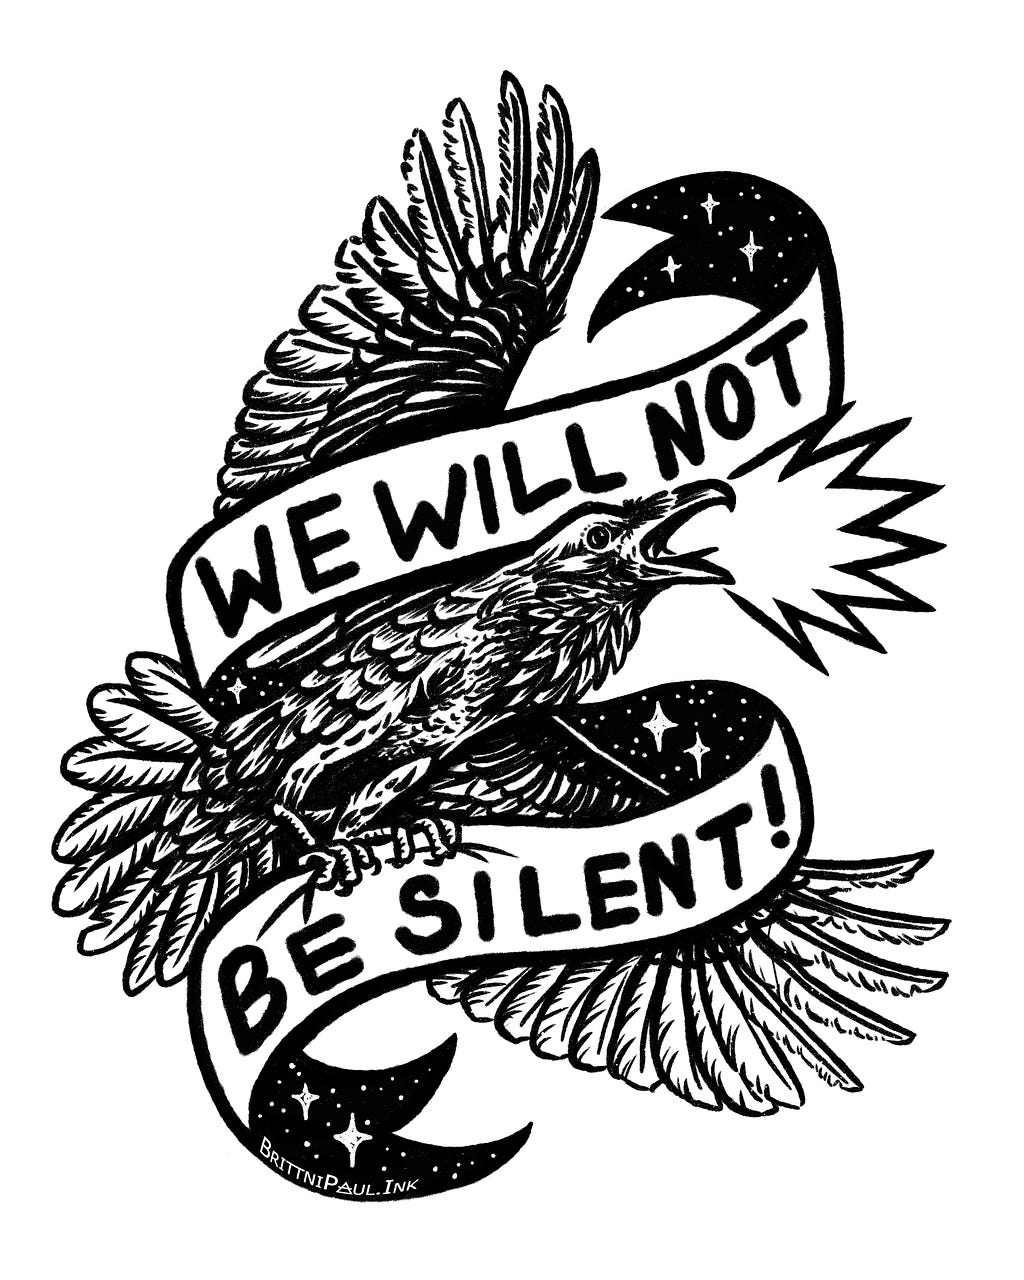 Cawing bird with ribbon stating, “We will not be silent!”